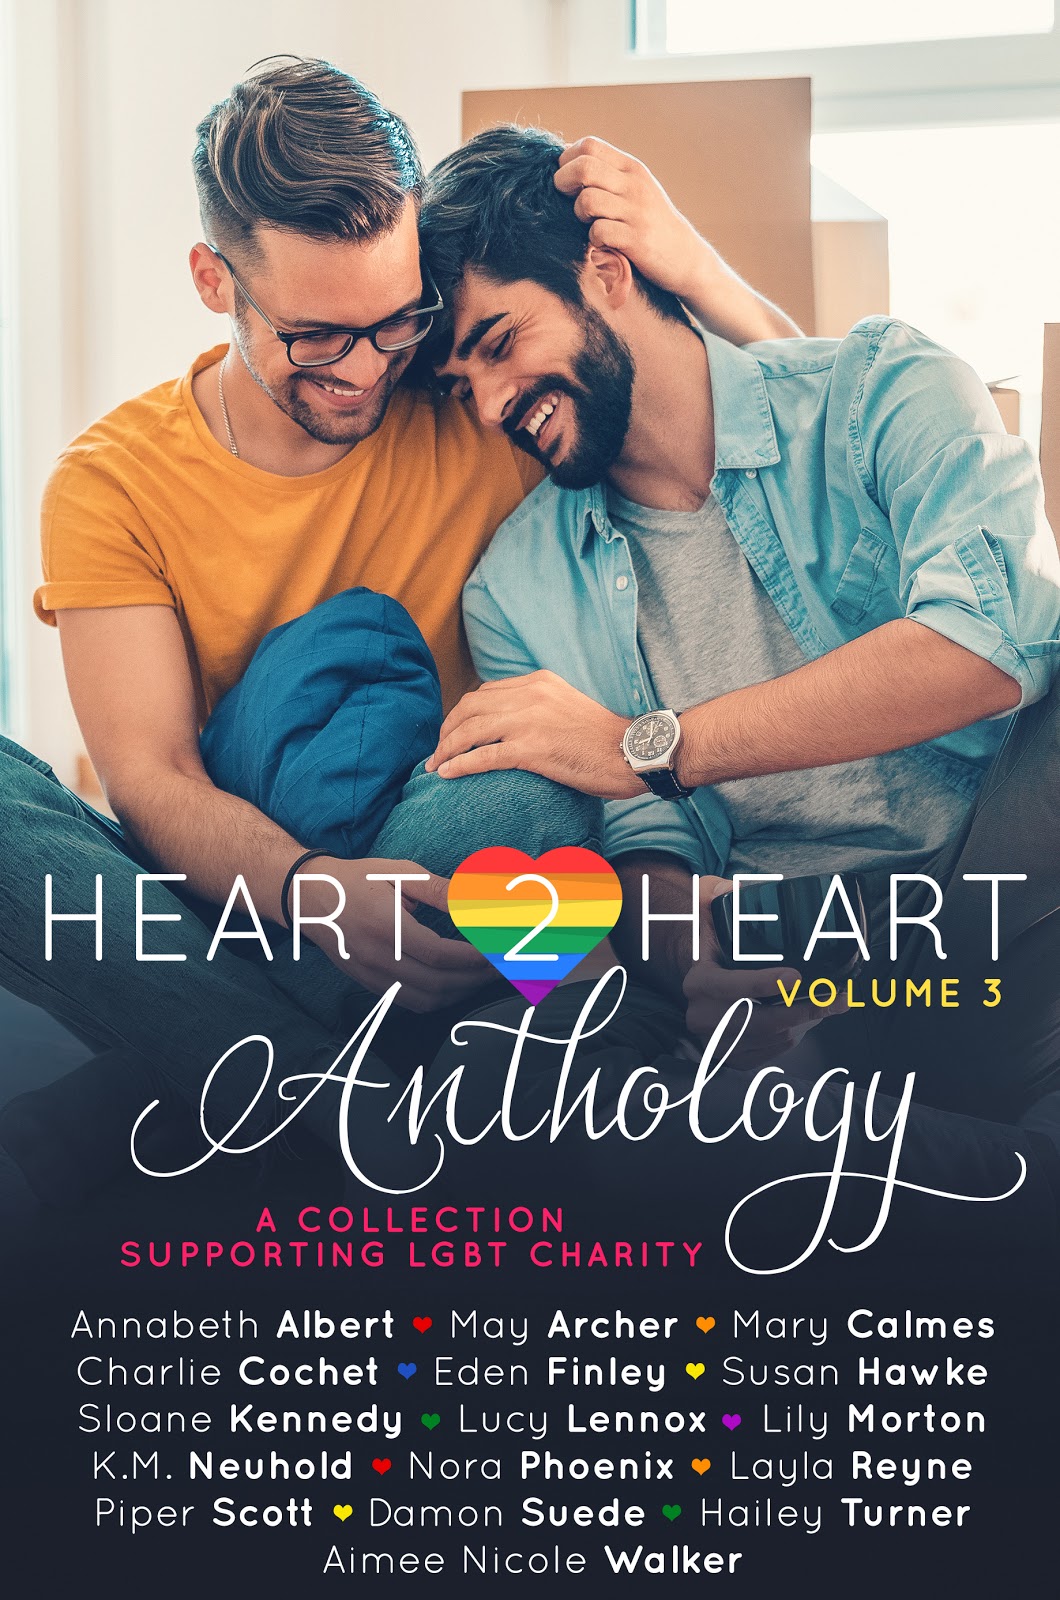 Heart2Heart Anthology exclusive and giveaway 🏳️‍🌈  benefiting charity  🏳️‍🌈